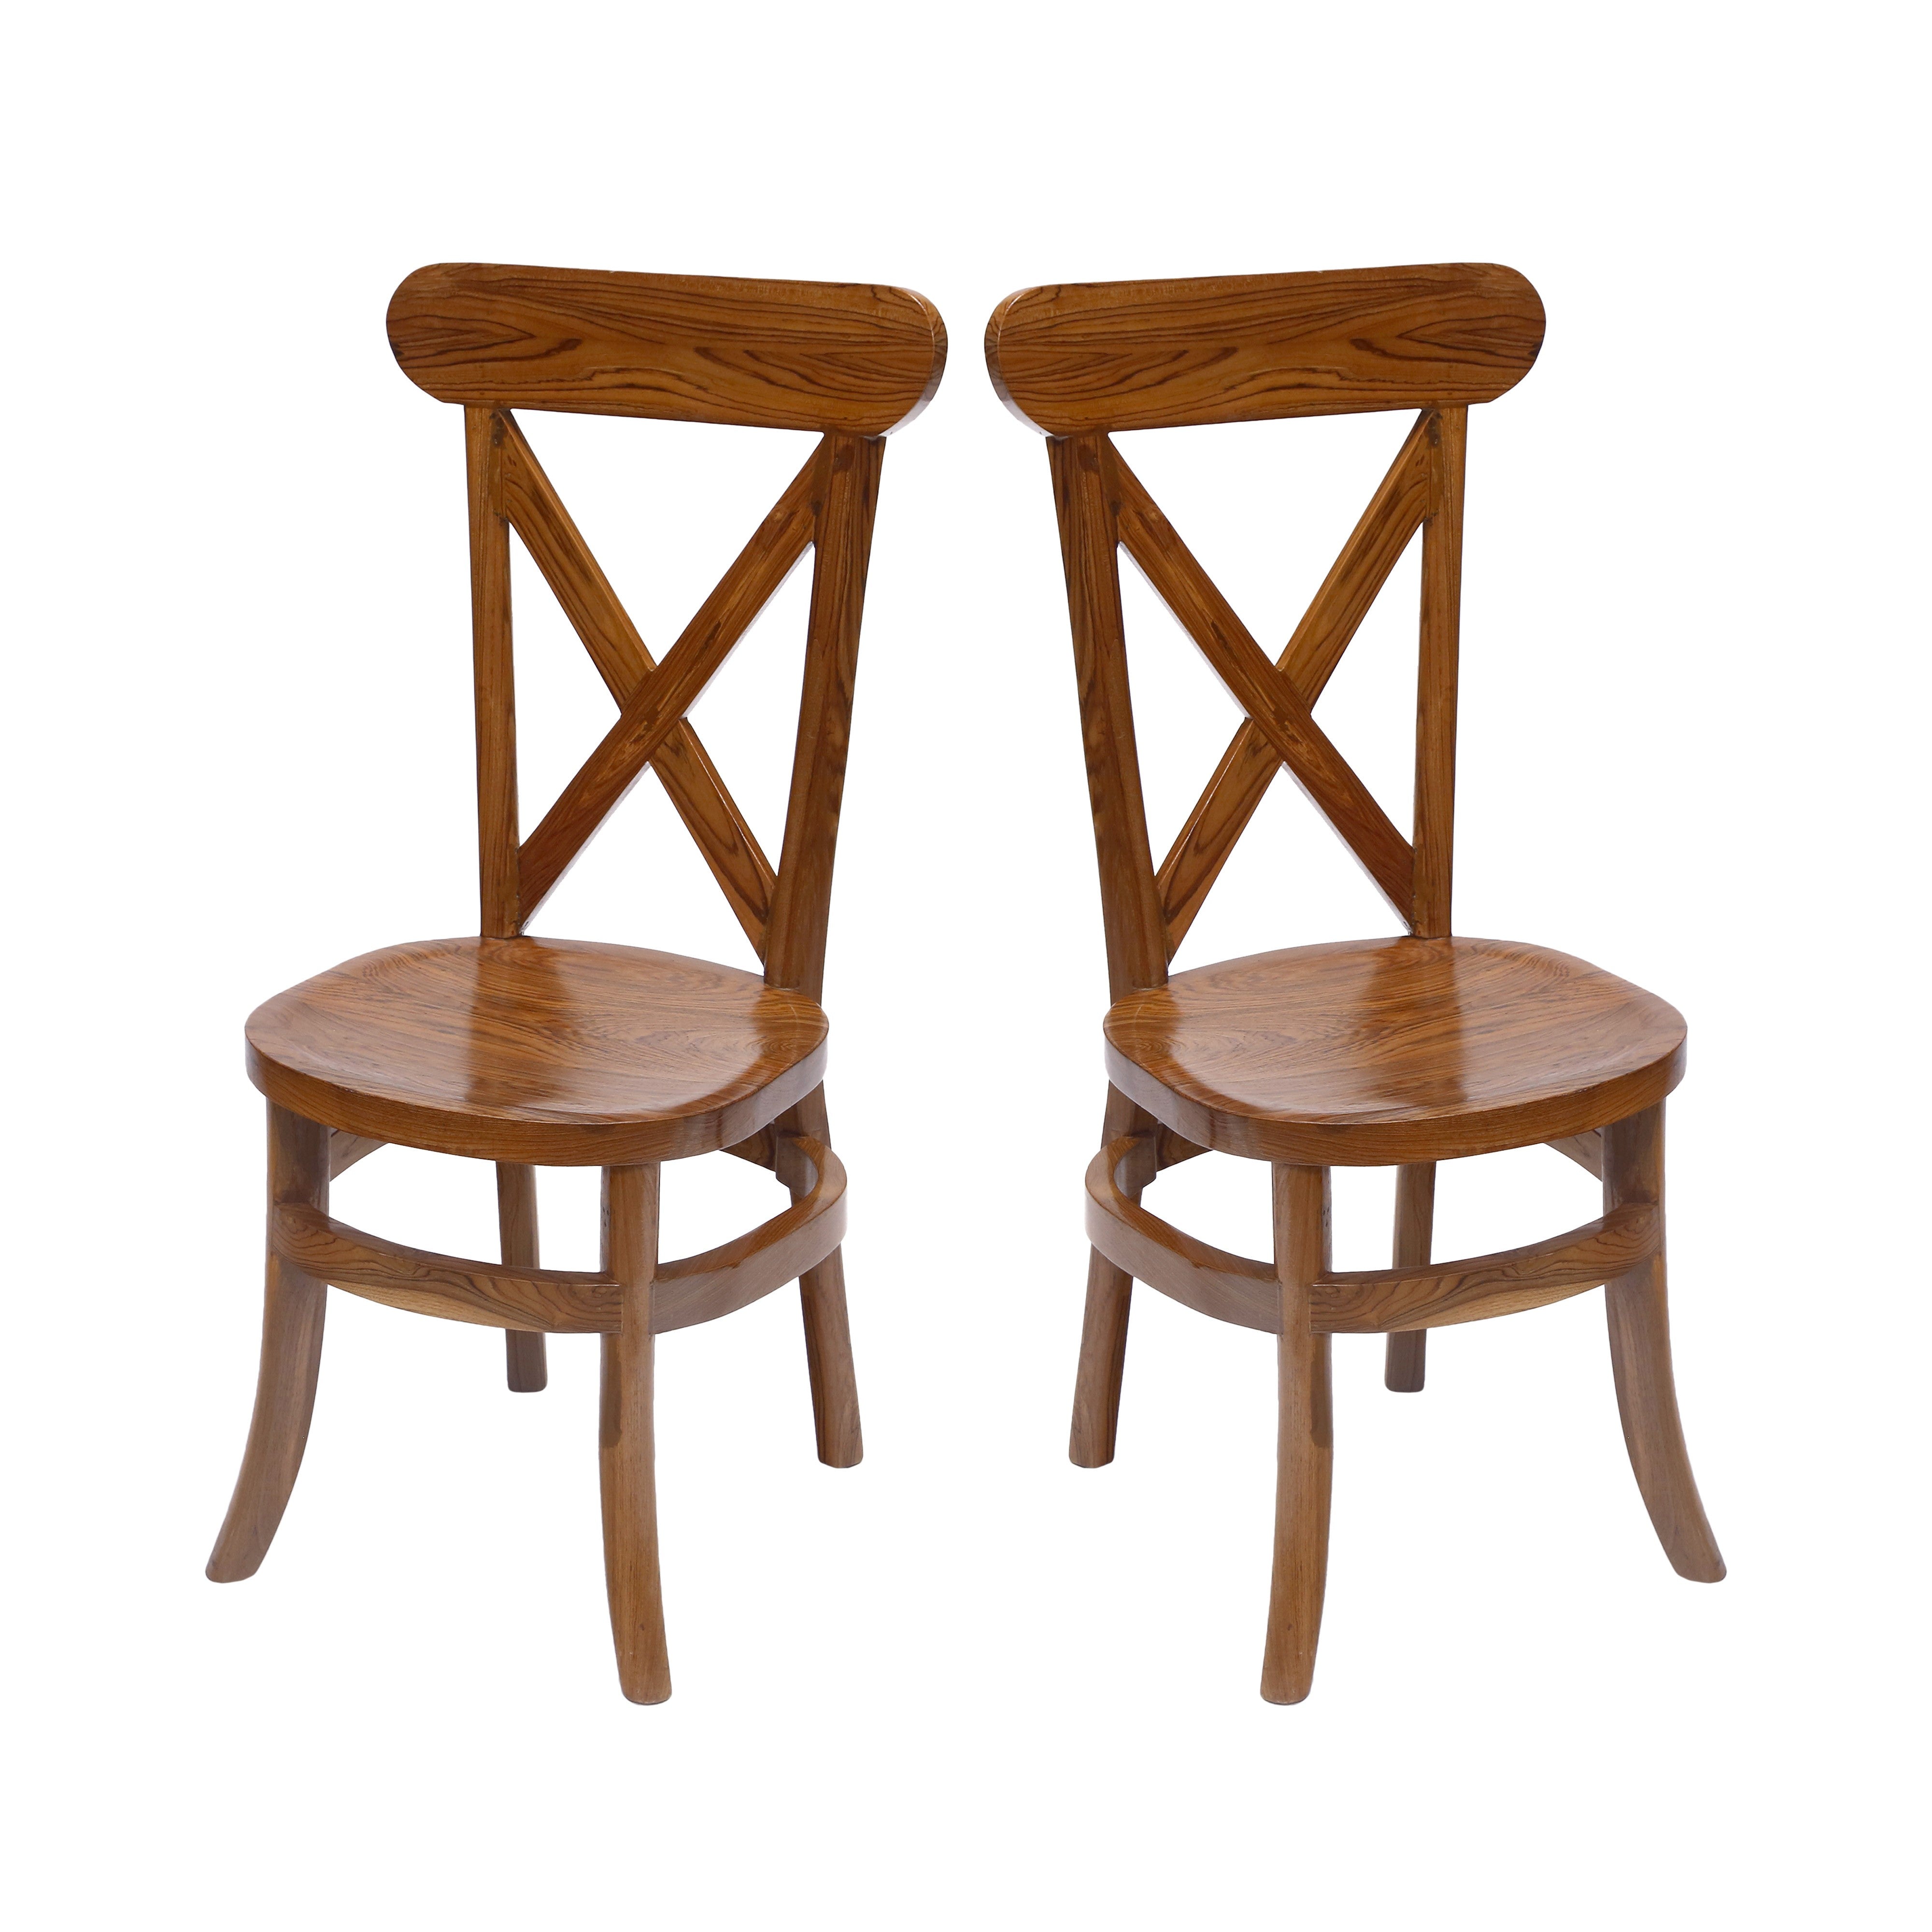 (Set of 2) Criss Cross Curved Dining Chair Dining Chair